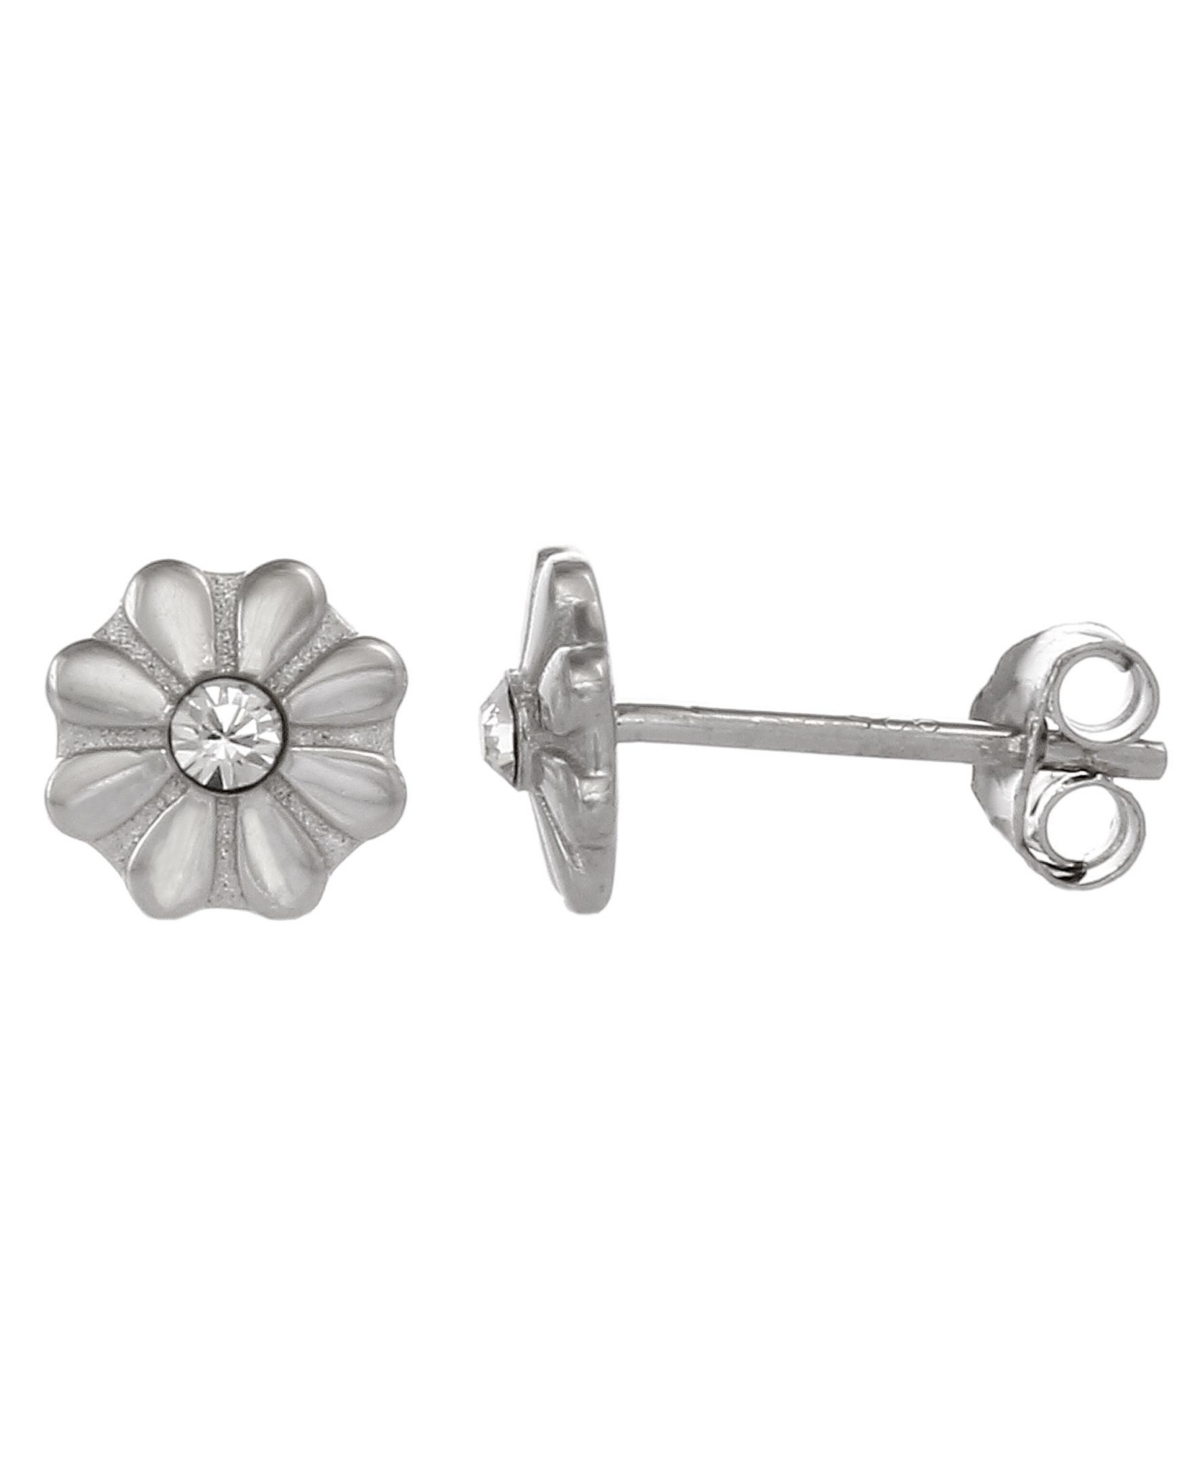 Fao Schwarz Women's Sterling Silver Flower Stud Earrings with Crystal Stone Accent